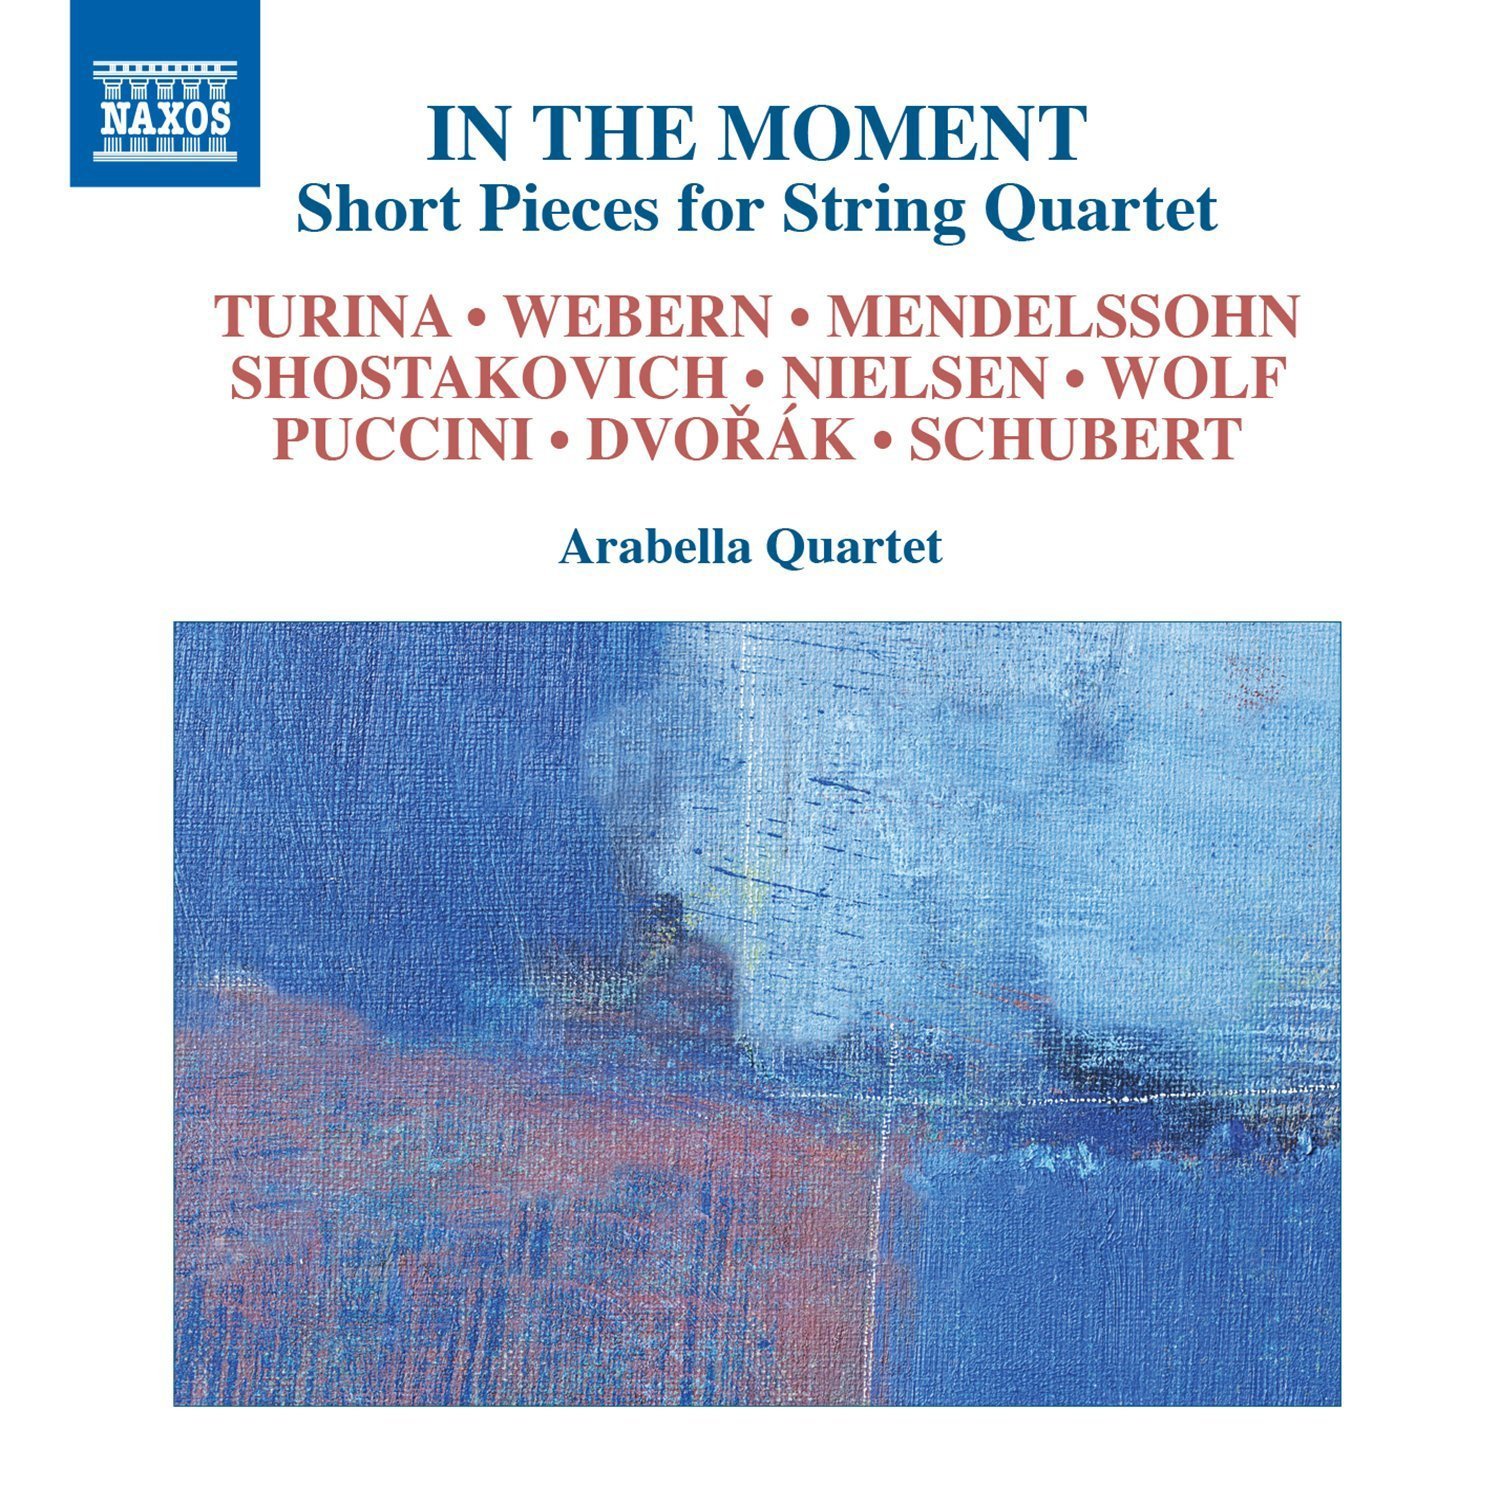 In the Moment: Short Pieces for String Quartet - A